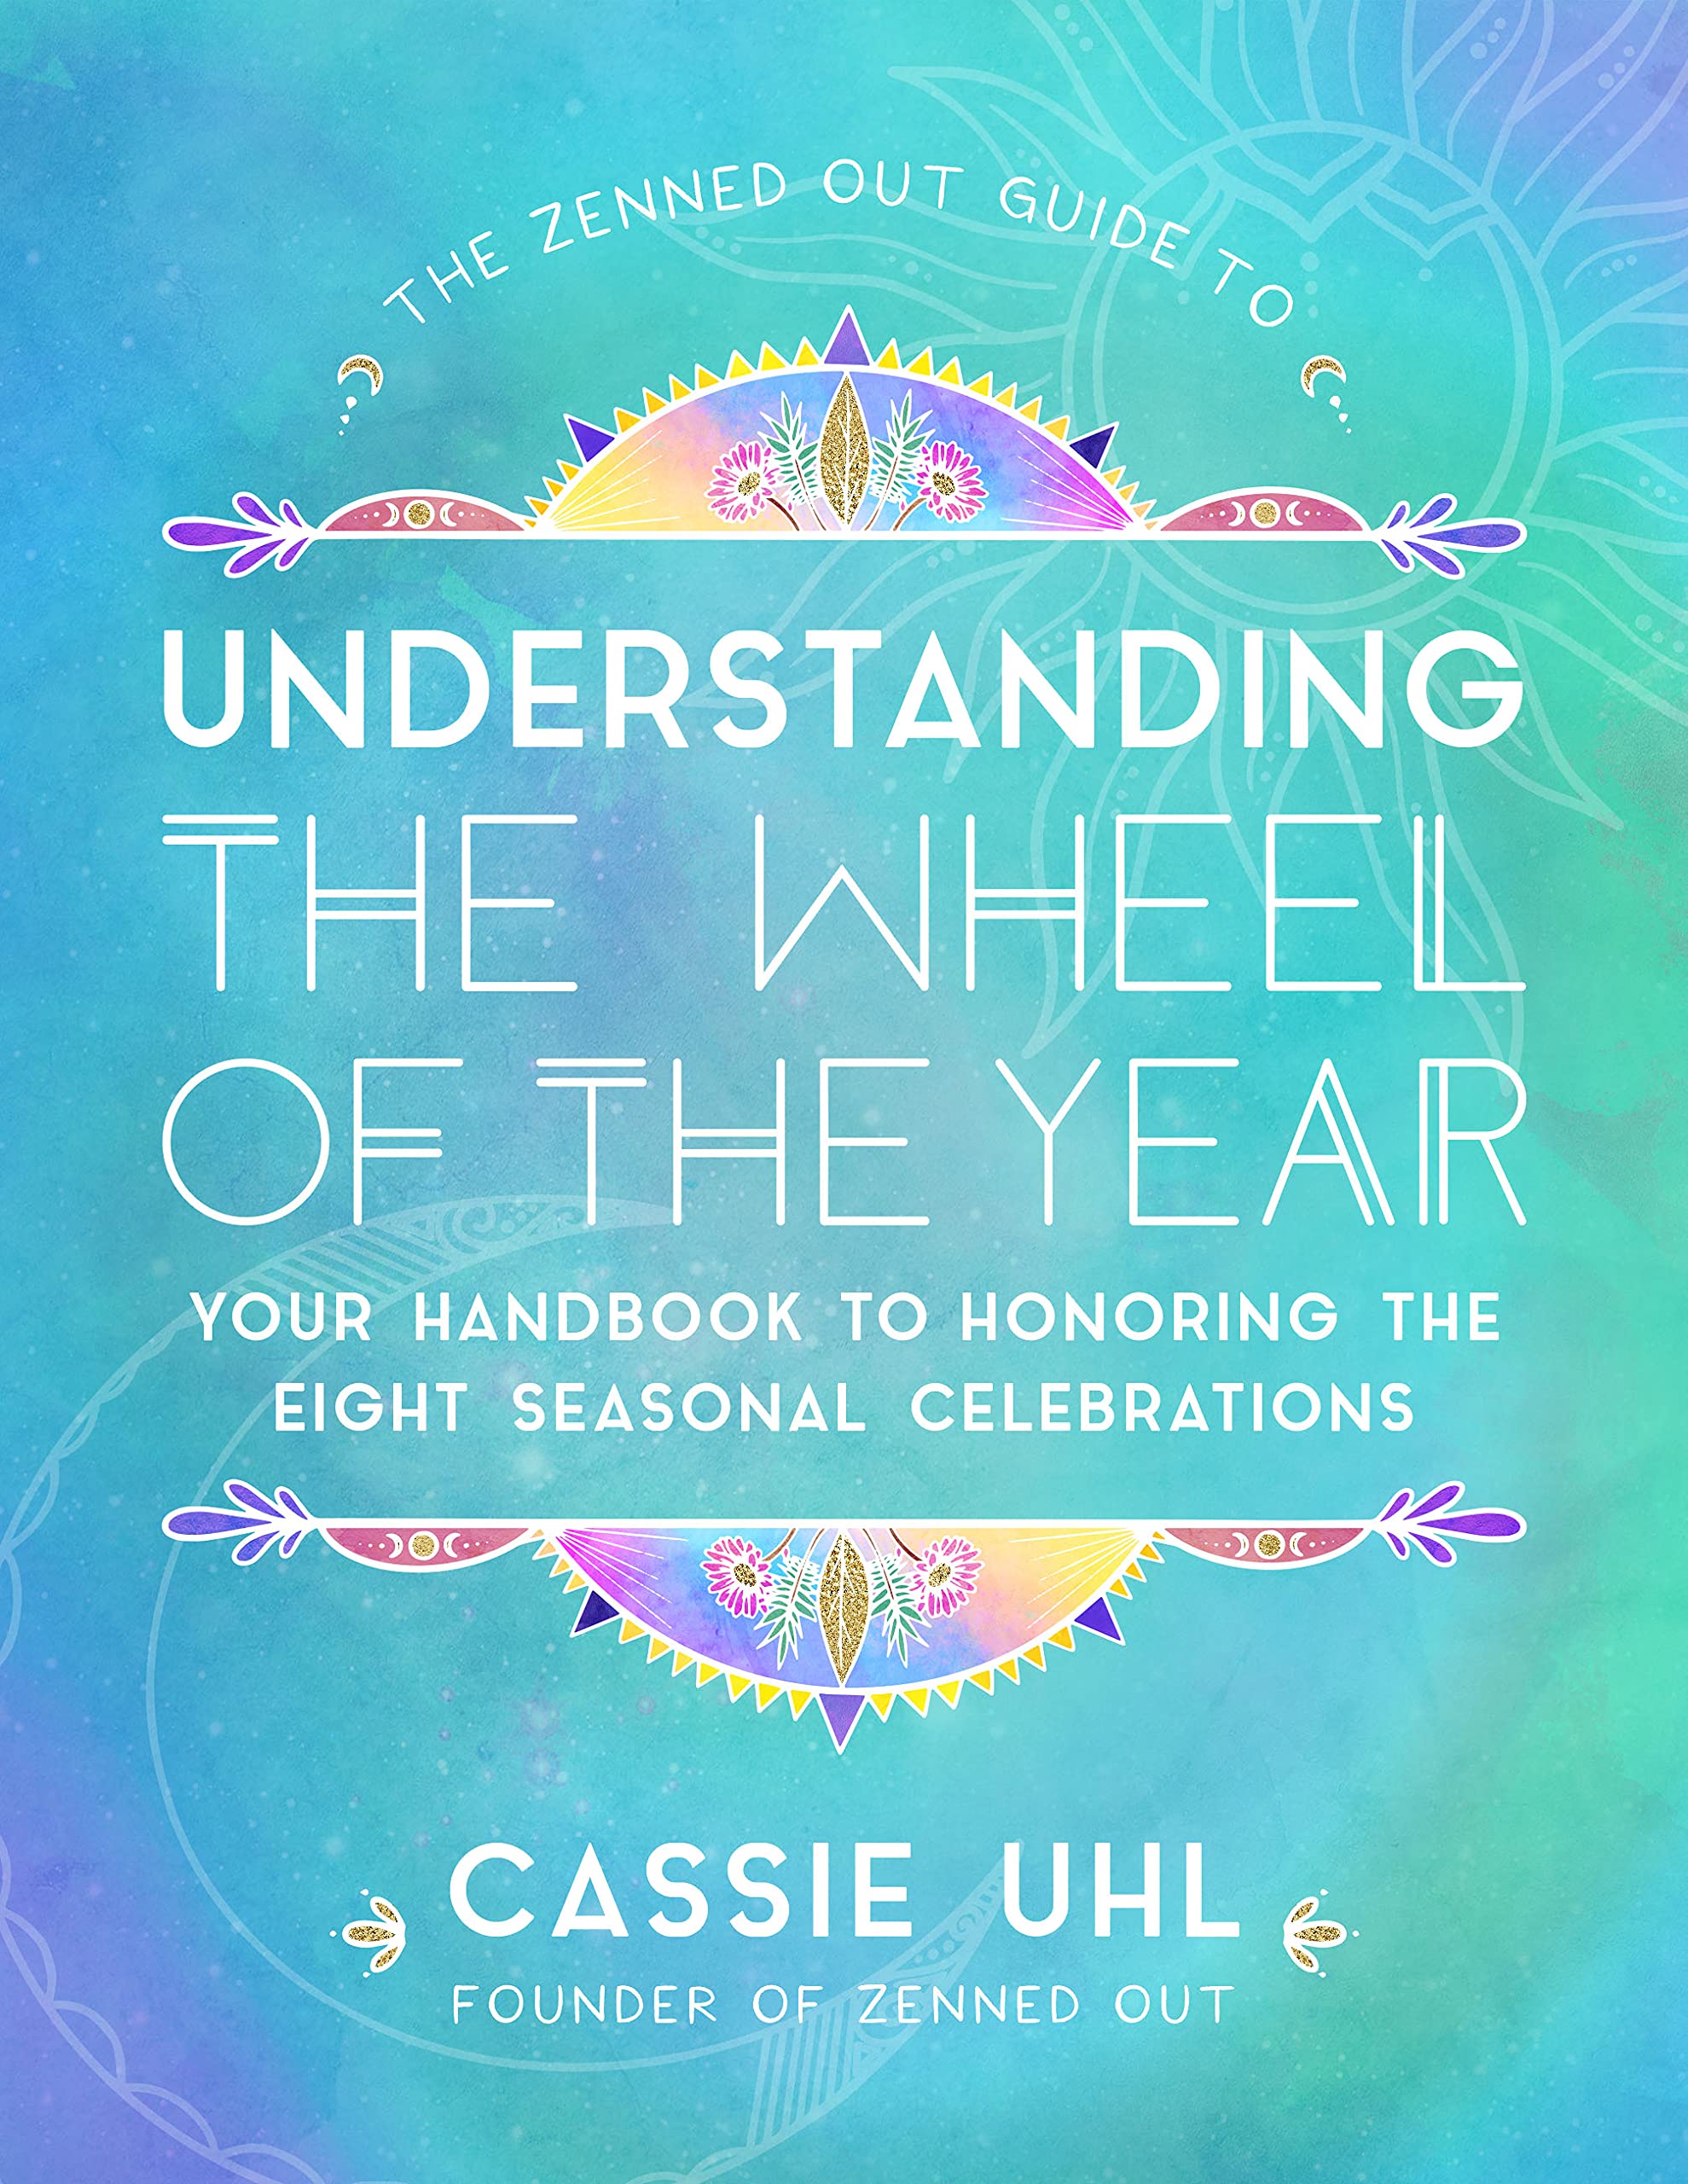 The Zenned Out Guide to Understanding the Wheel of the Year: Your Handbook to Honoring the Eight Seasonal Celebrations